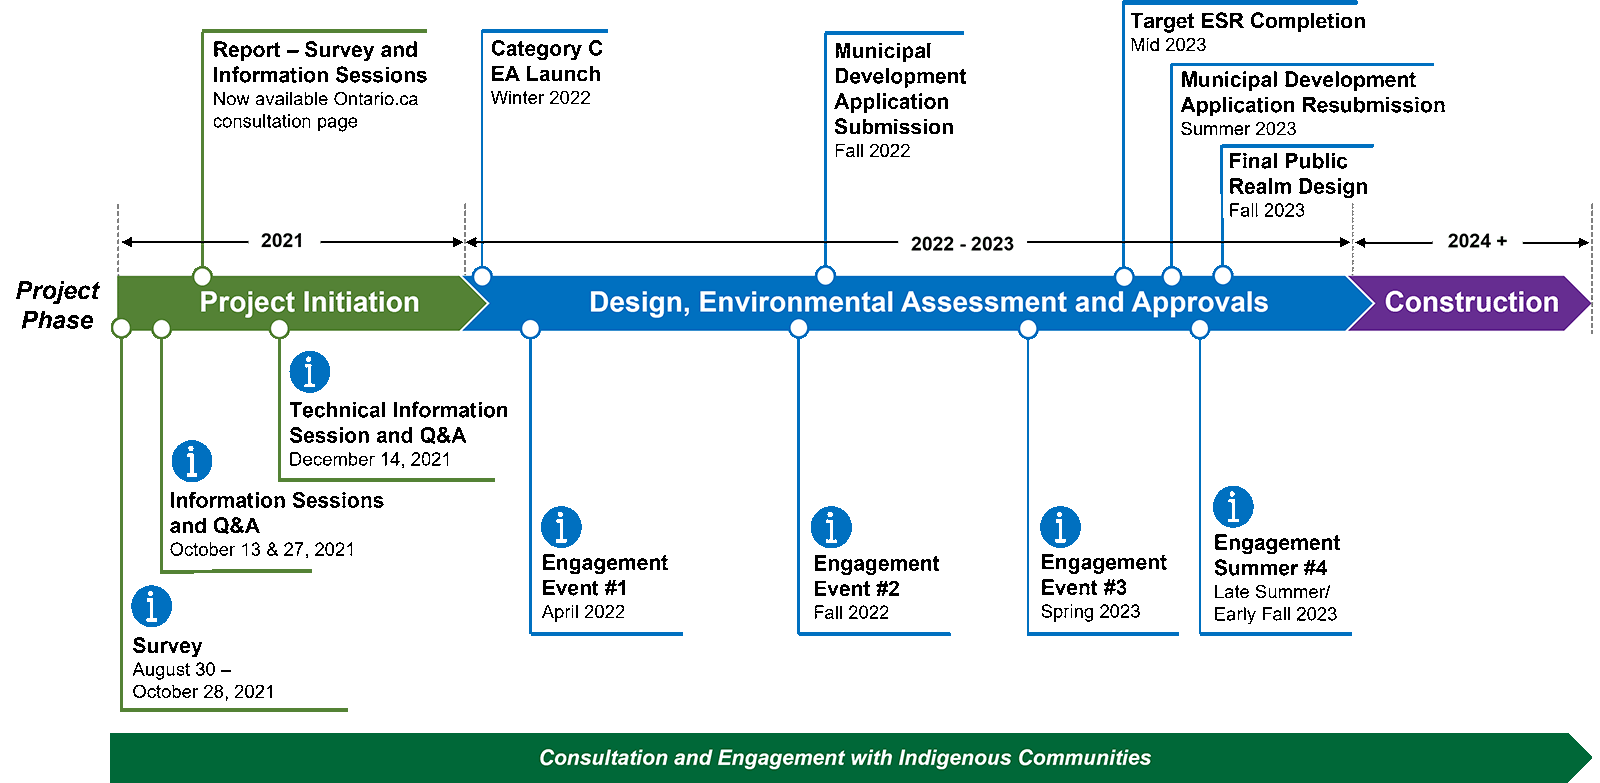 Timeline graphic showing three project phases: project initiation during 2021; design, environmental assessment and approvals from 2022 to 2023, and construction in 2024 and 2025. The events shown during the project initiation phase are a survey, the survey report and two information sessions. EA launch is shown at the beginning of the design, EA and approvals phase in winter 2022, followed by a municipal development application submission in Fall 2022, target ESR completion mid-2023, municipal development application resubmission in summer 2023, and the final public realm design in Fall 2023. Four engagement events are also shown below in April 2022, fall 2022, spring 2023, and late summer or early fall 2023. Consultation and engagement with Indigenous communities is shown below occurring throughout the project timeline. 